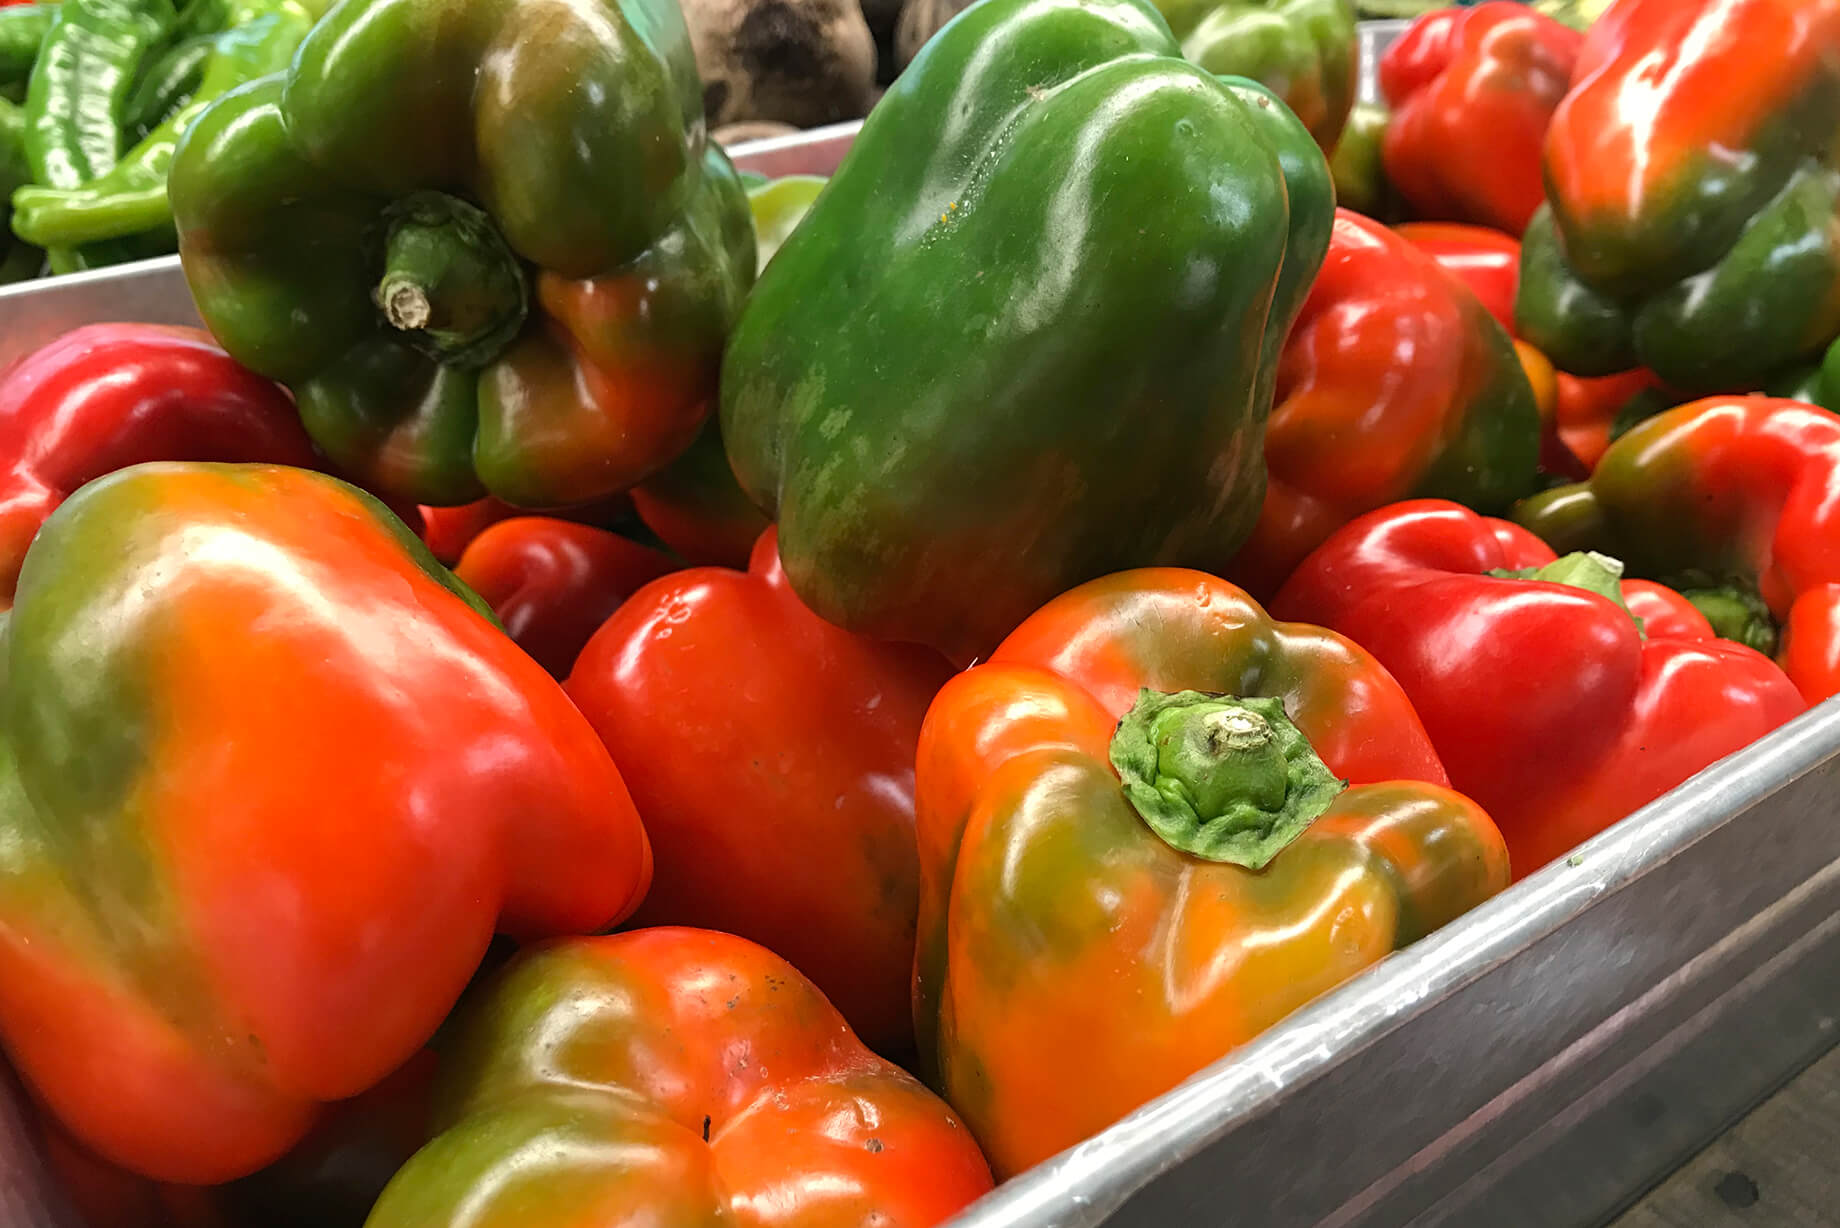 Red bell peppers are in season right now at the farmers market